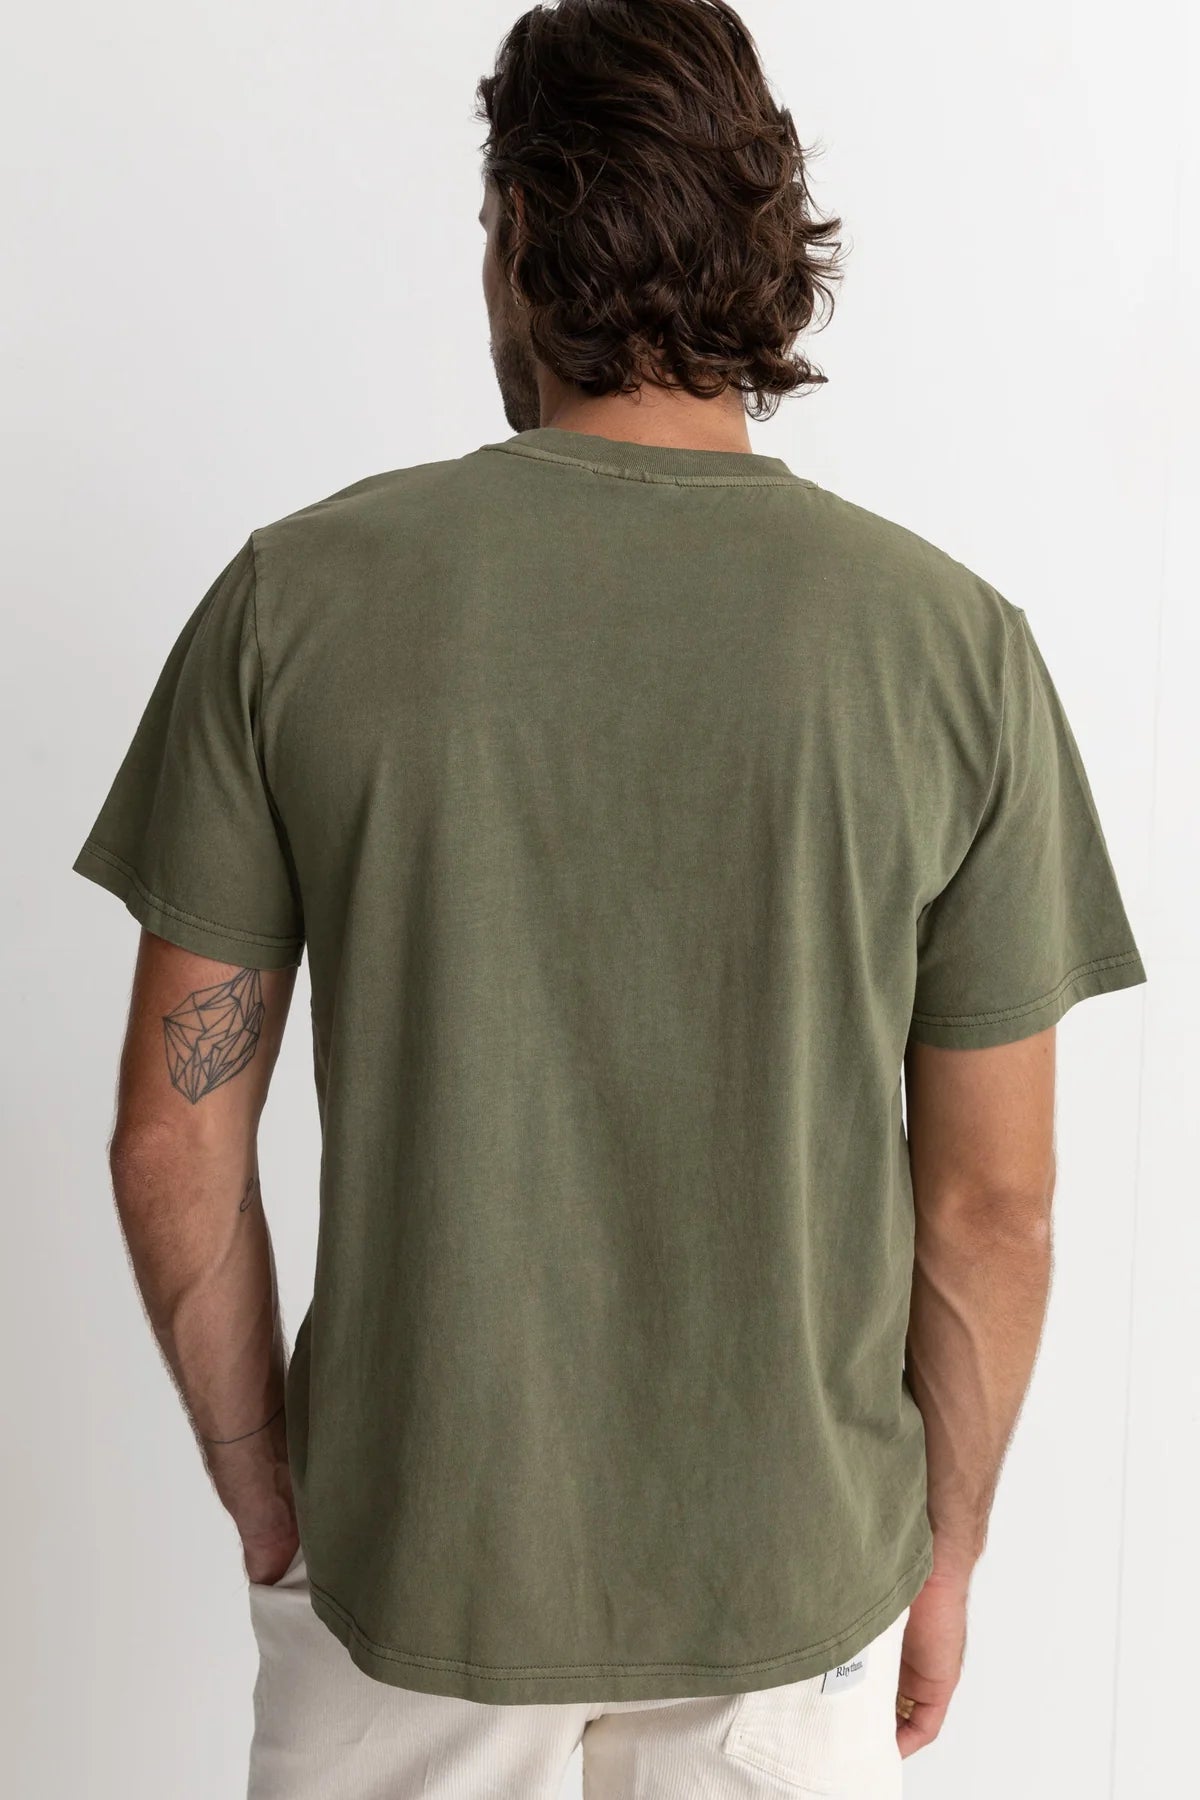 Back view of men's olive colored short sleeve tshirt